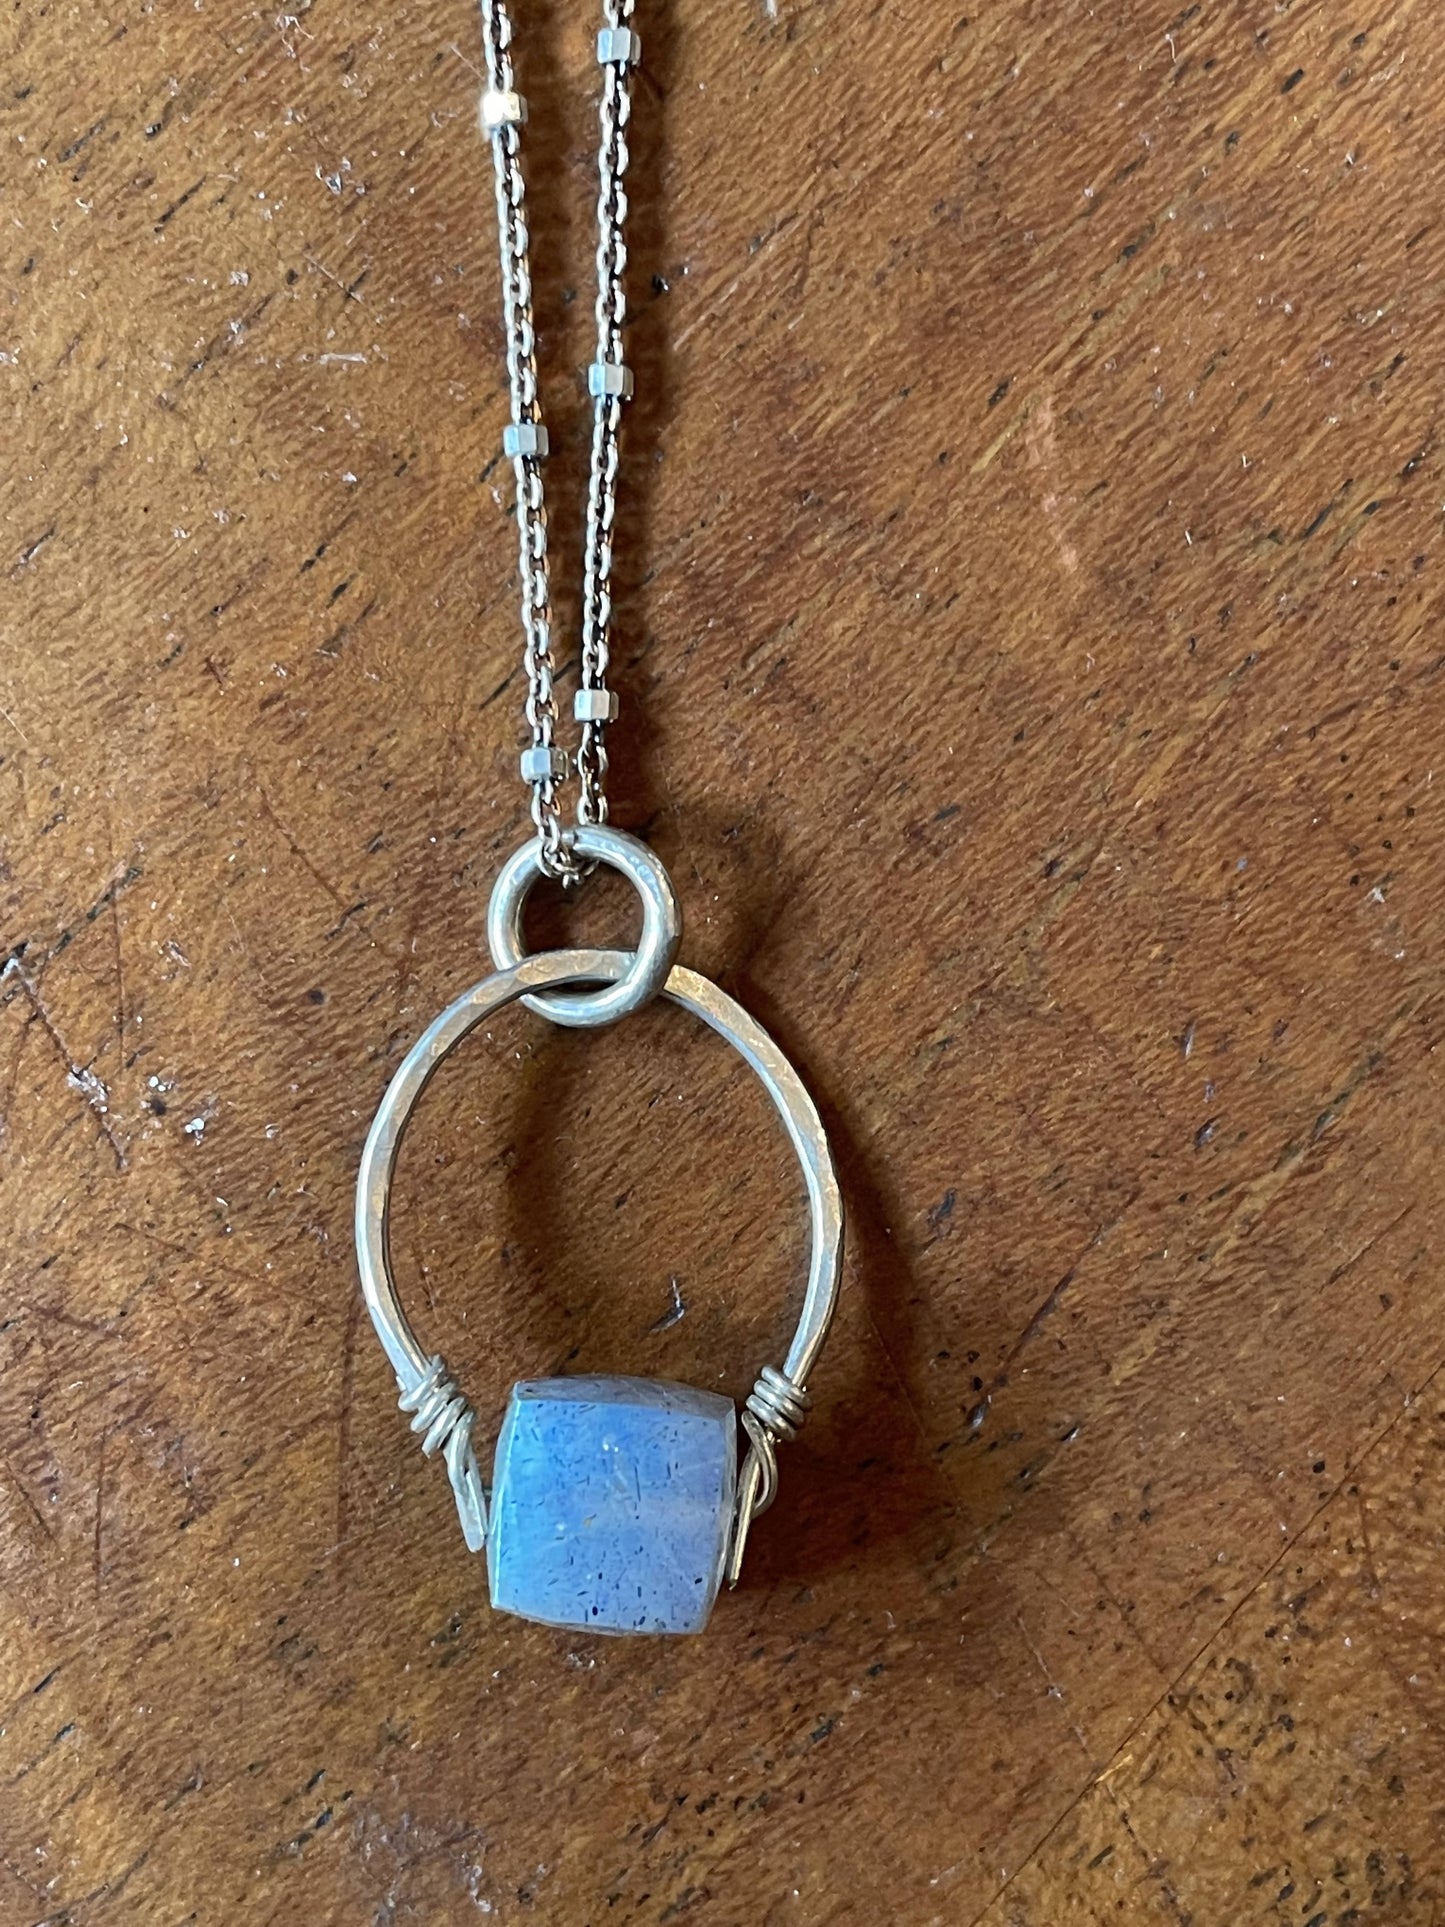 "Get lucky" Hand forged sterling silver pendant with gemstone on sterling silver chain. Assorted gemstones.